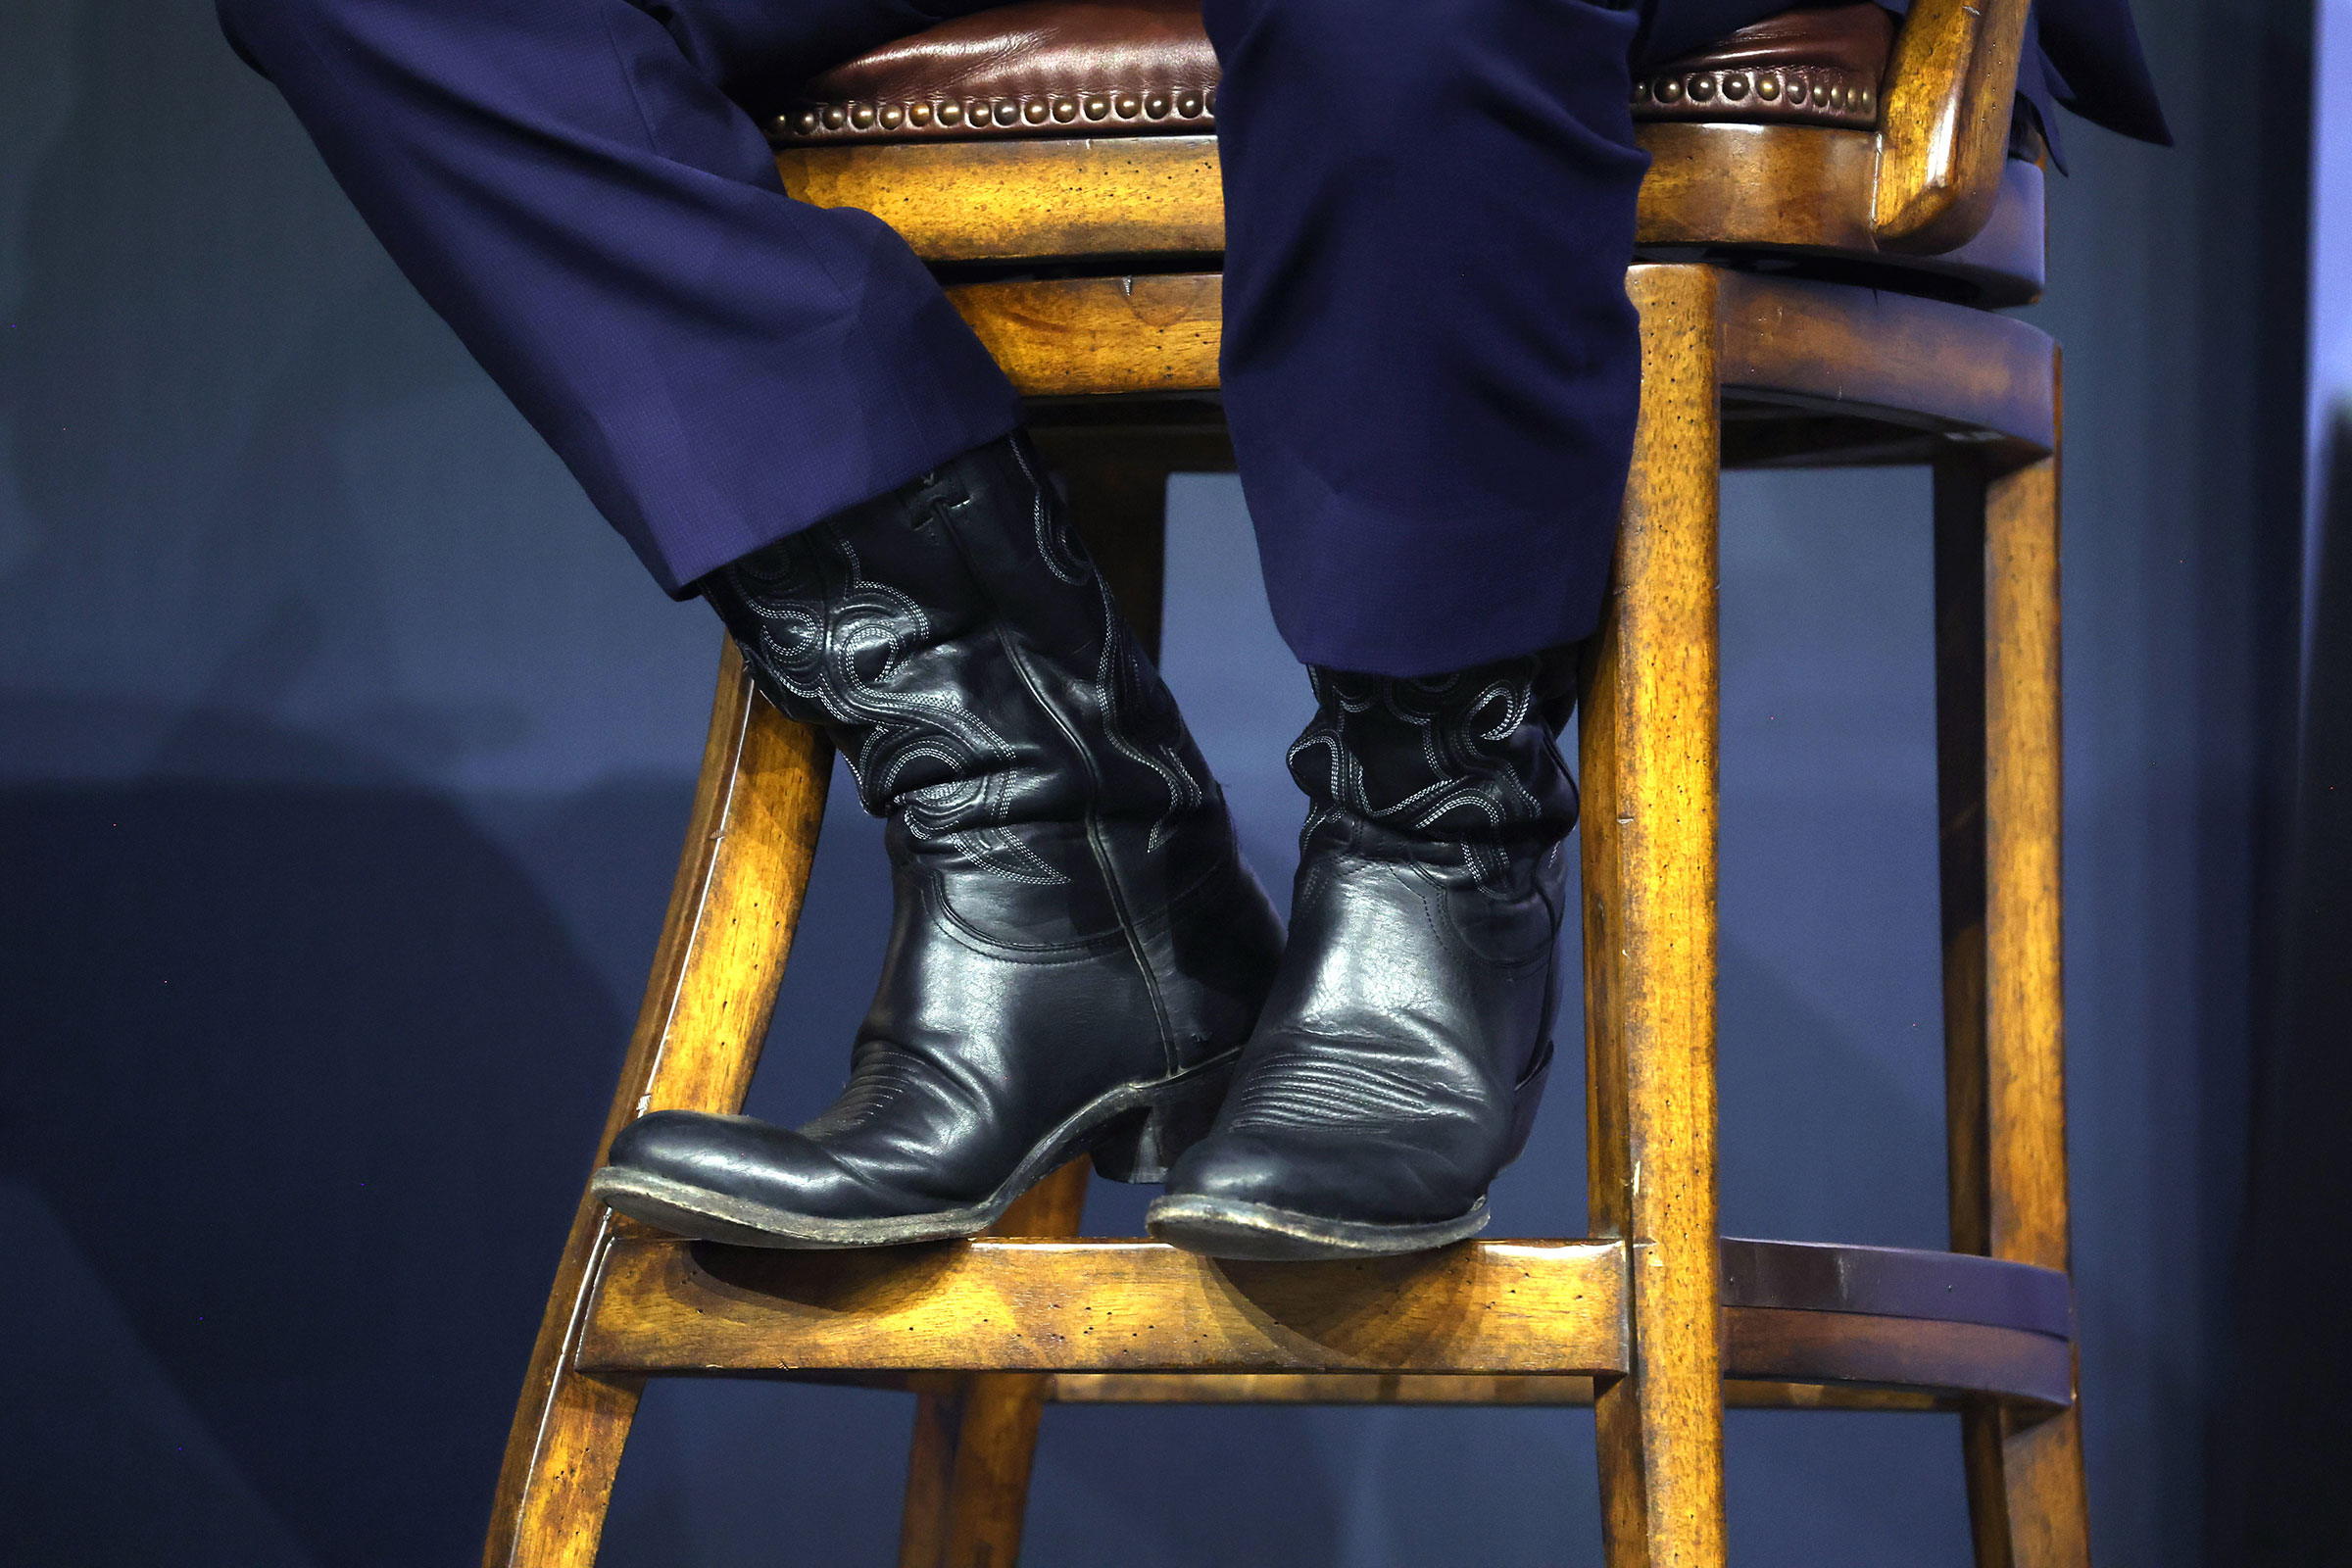 A detail image of cowboy boots propped up on a wooden chair, the boots worn by Ron DeSantis